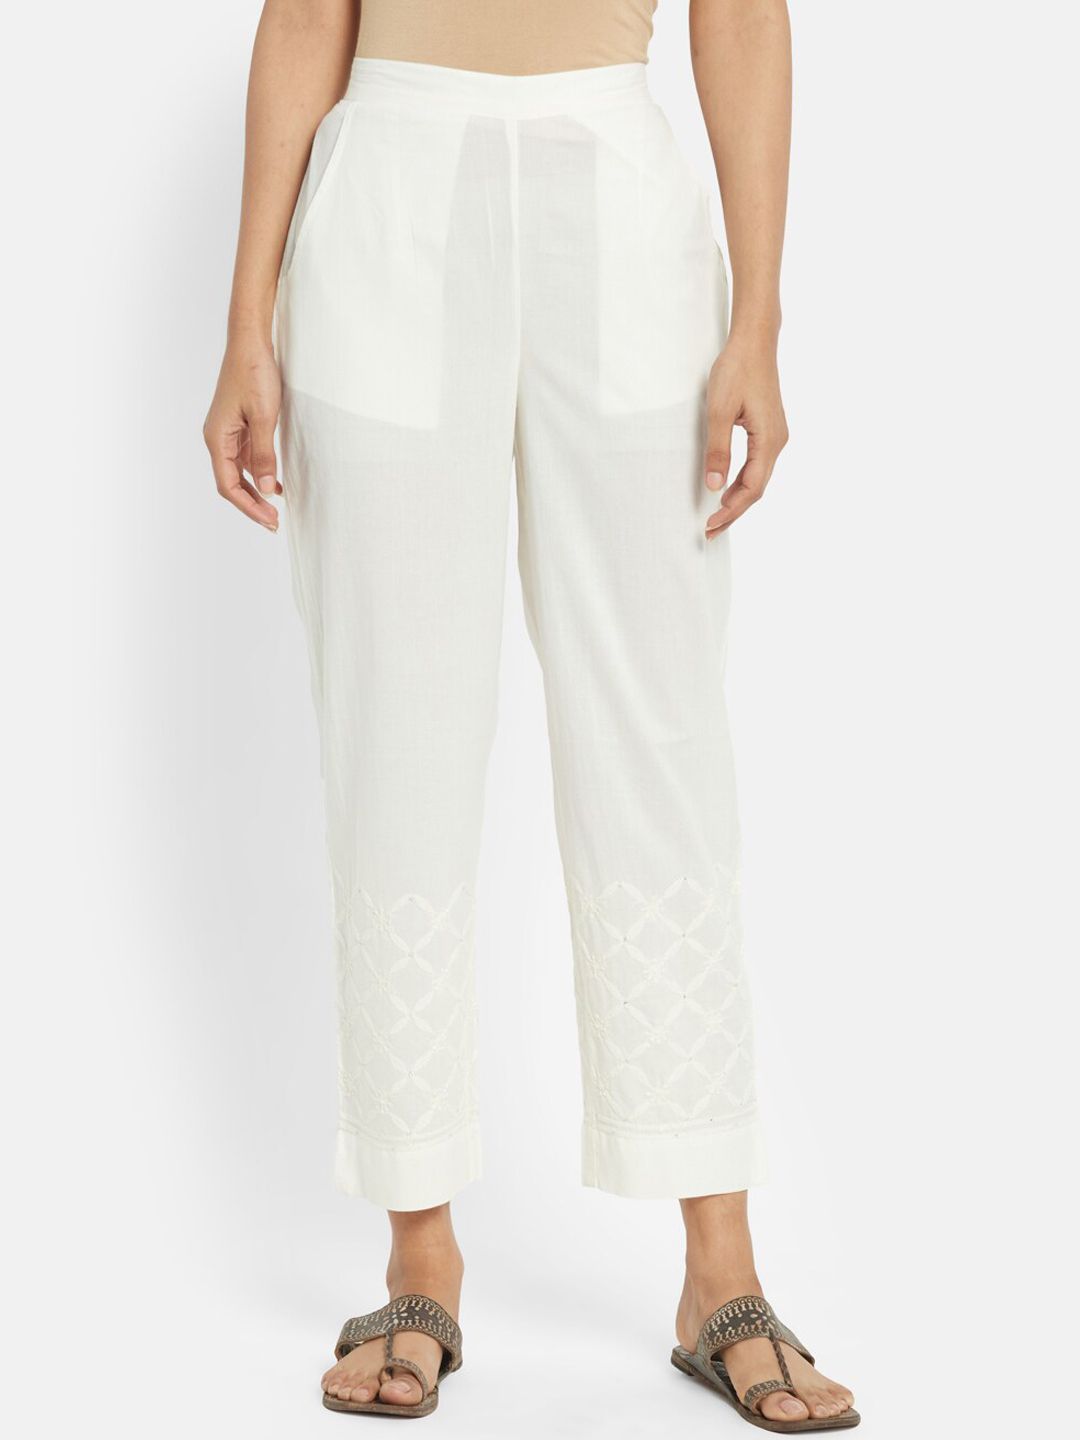 Fabindia Women Off White Culottes Cotton Trousers Price in India